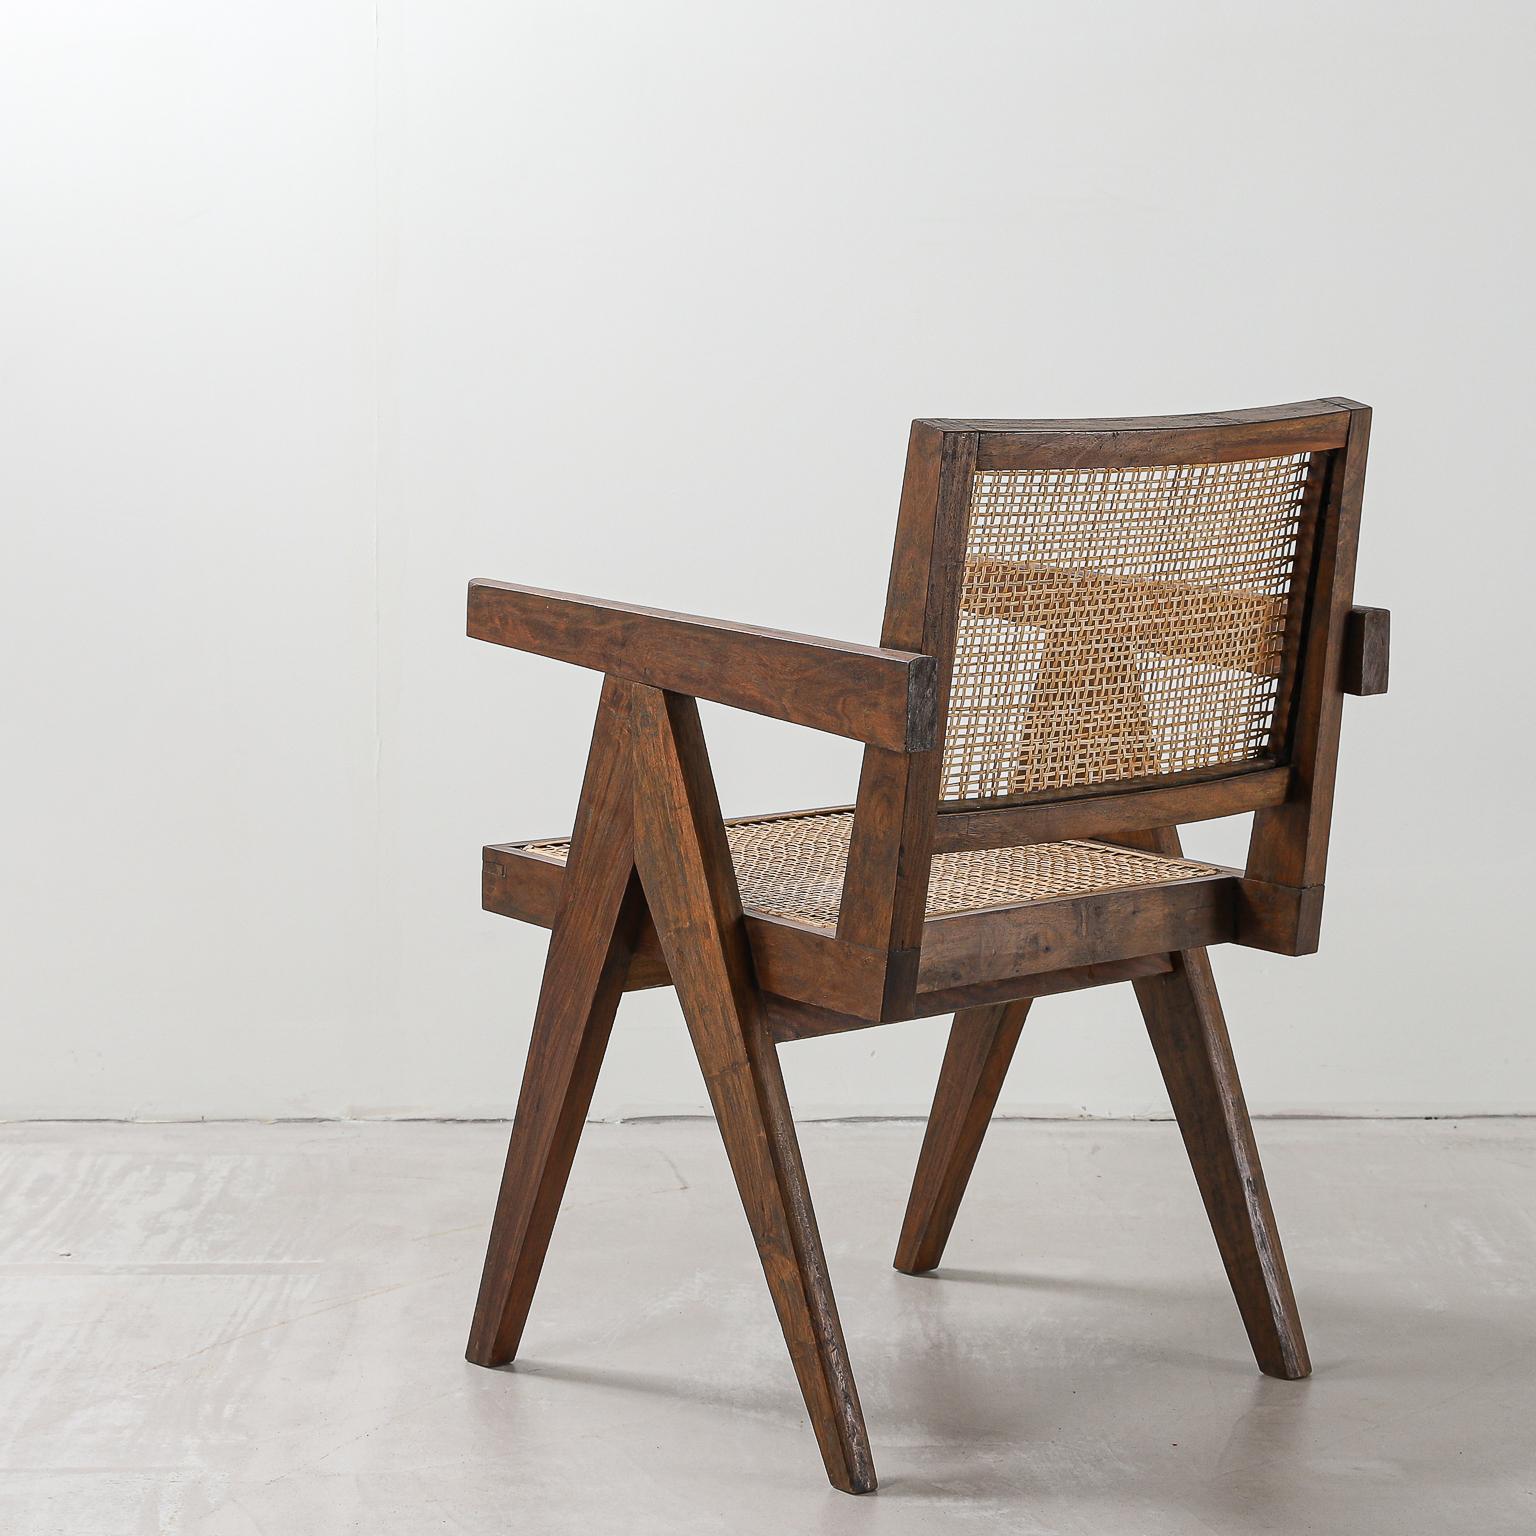 Rattan Pair of Pierre Jeanneret Office Chair, Variant, circa 1953-1954